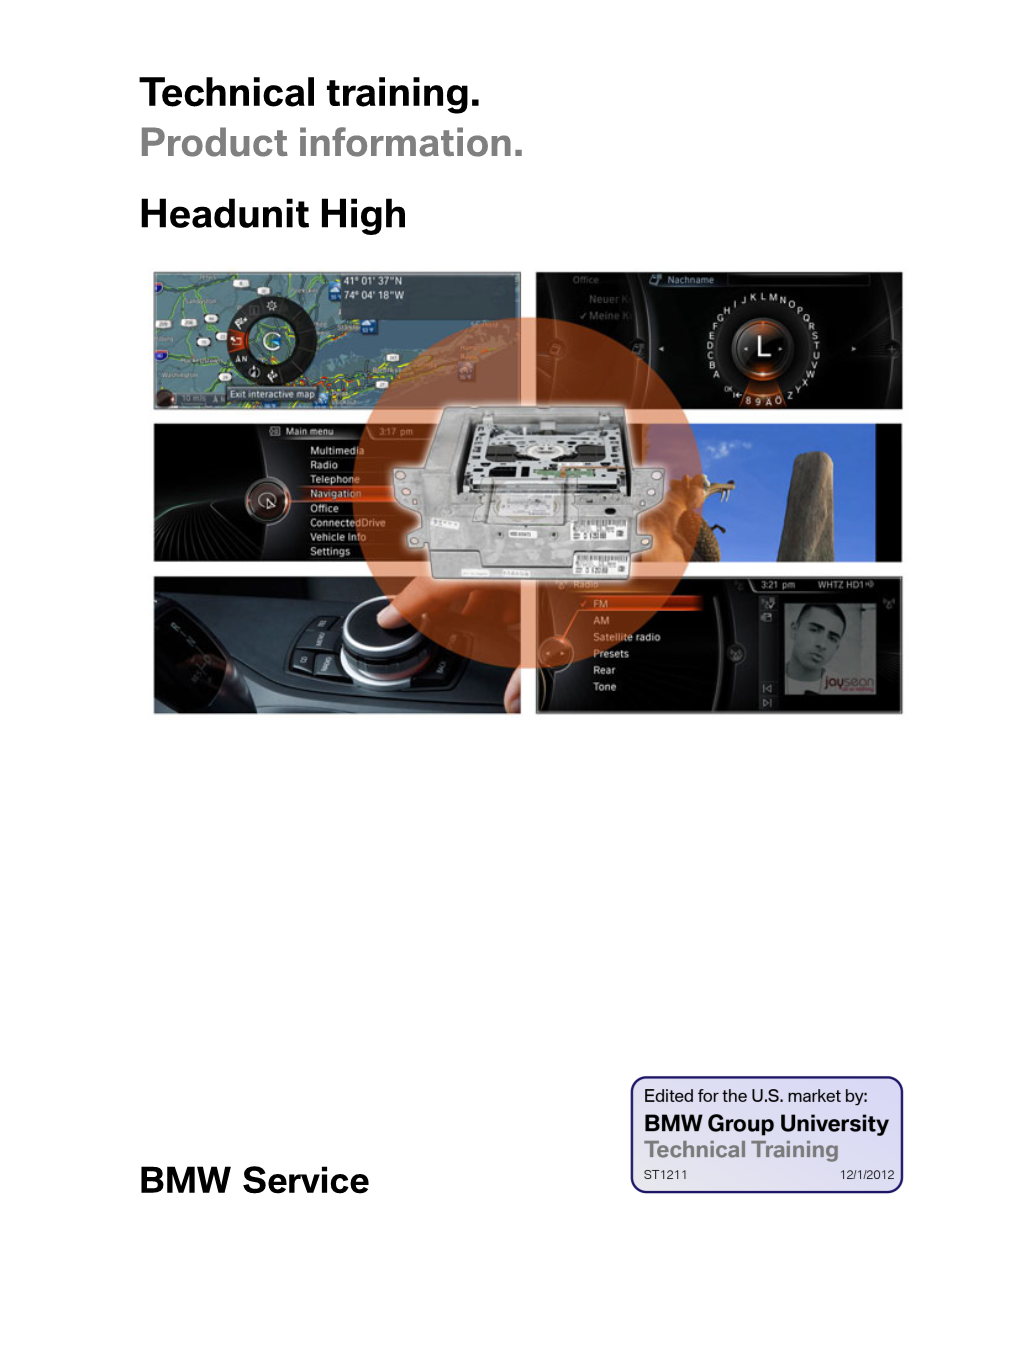 Technical Training. Product Information. Headunit High